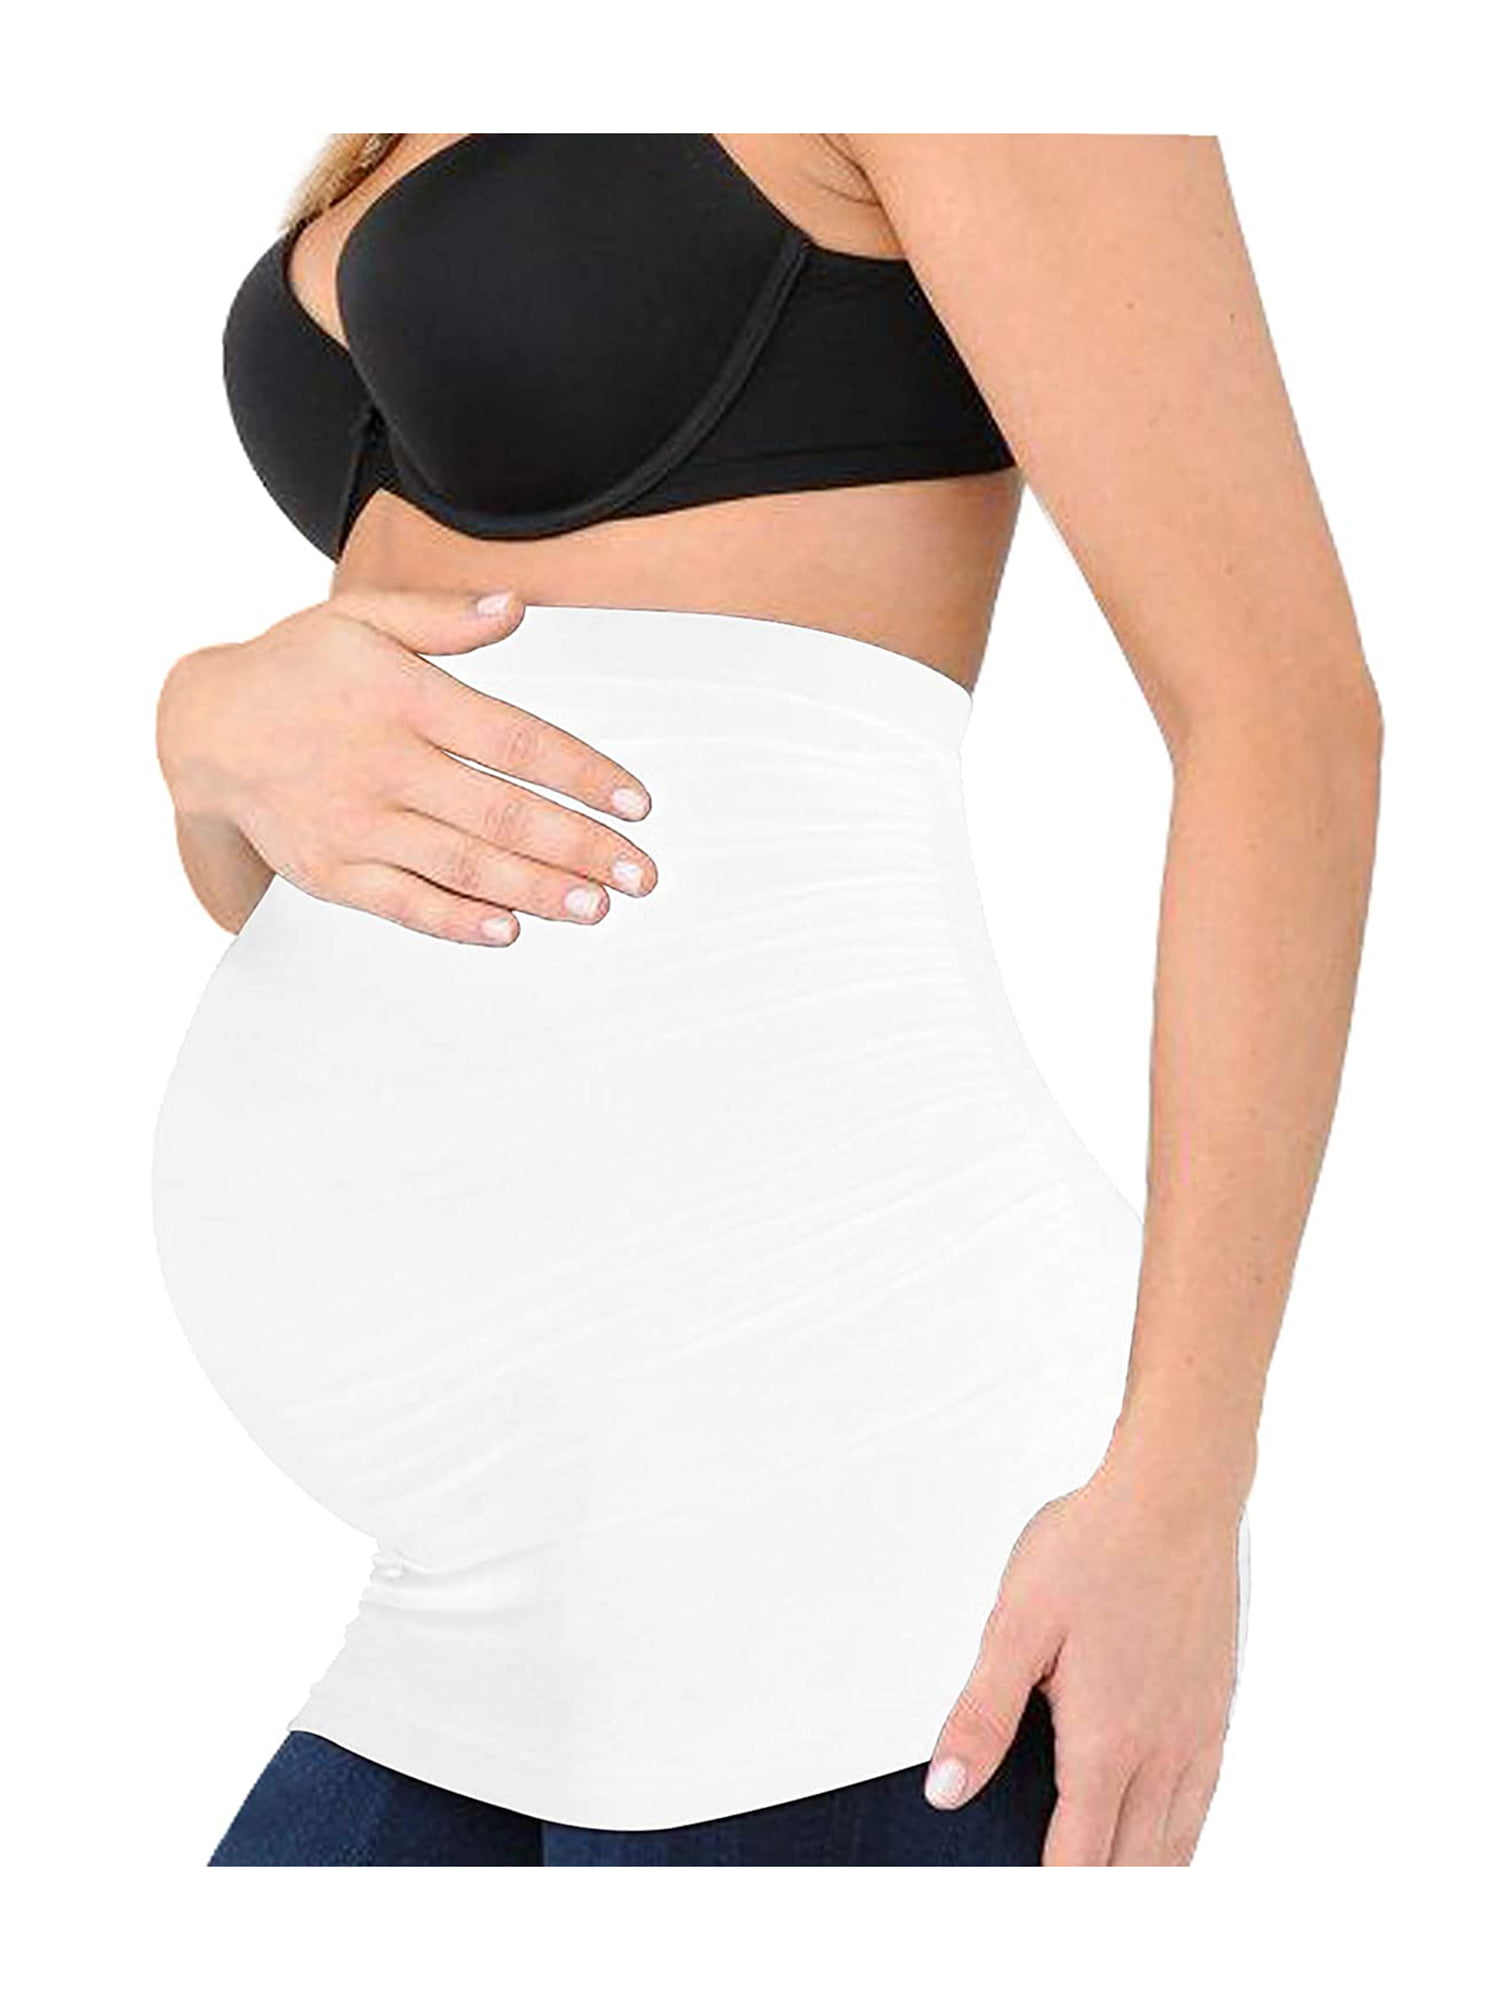 Womens Maternity Belly Band Seamless Non-slip Silicone Belt Wardrobe Extender 